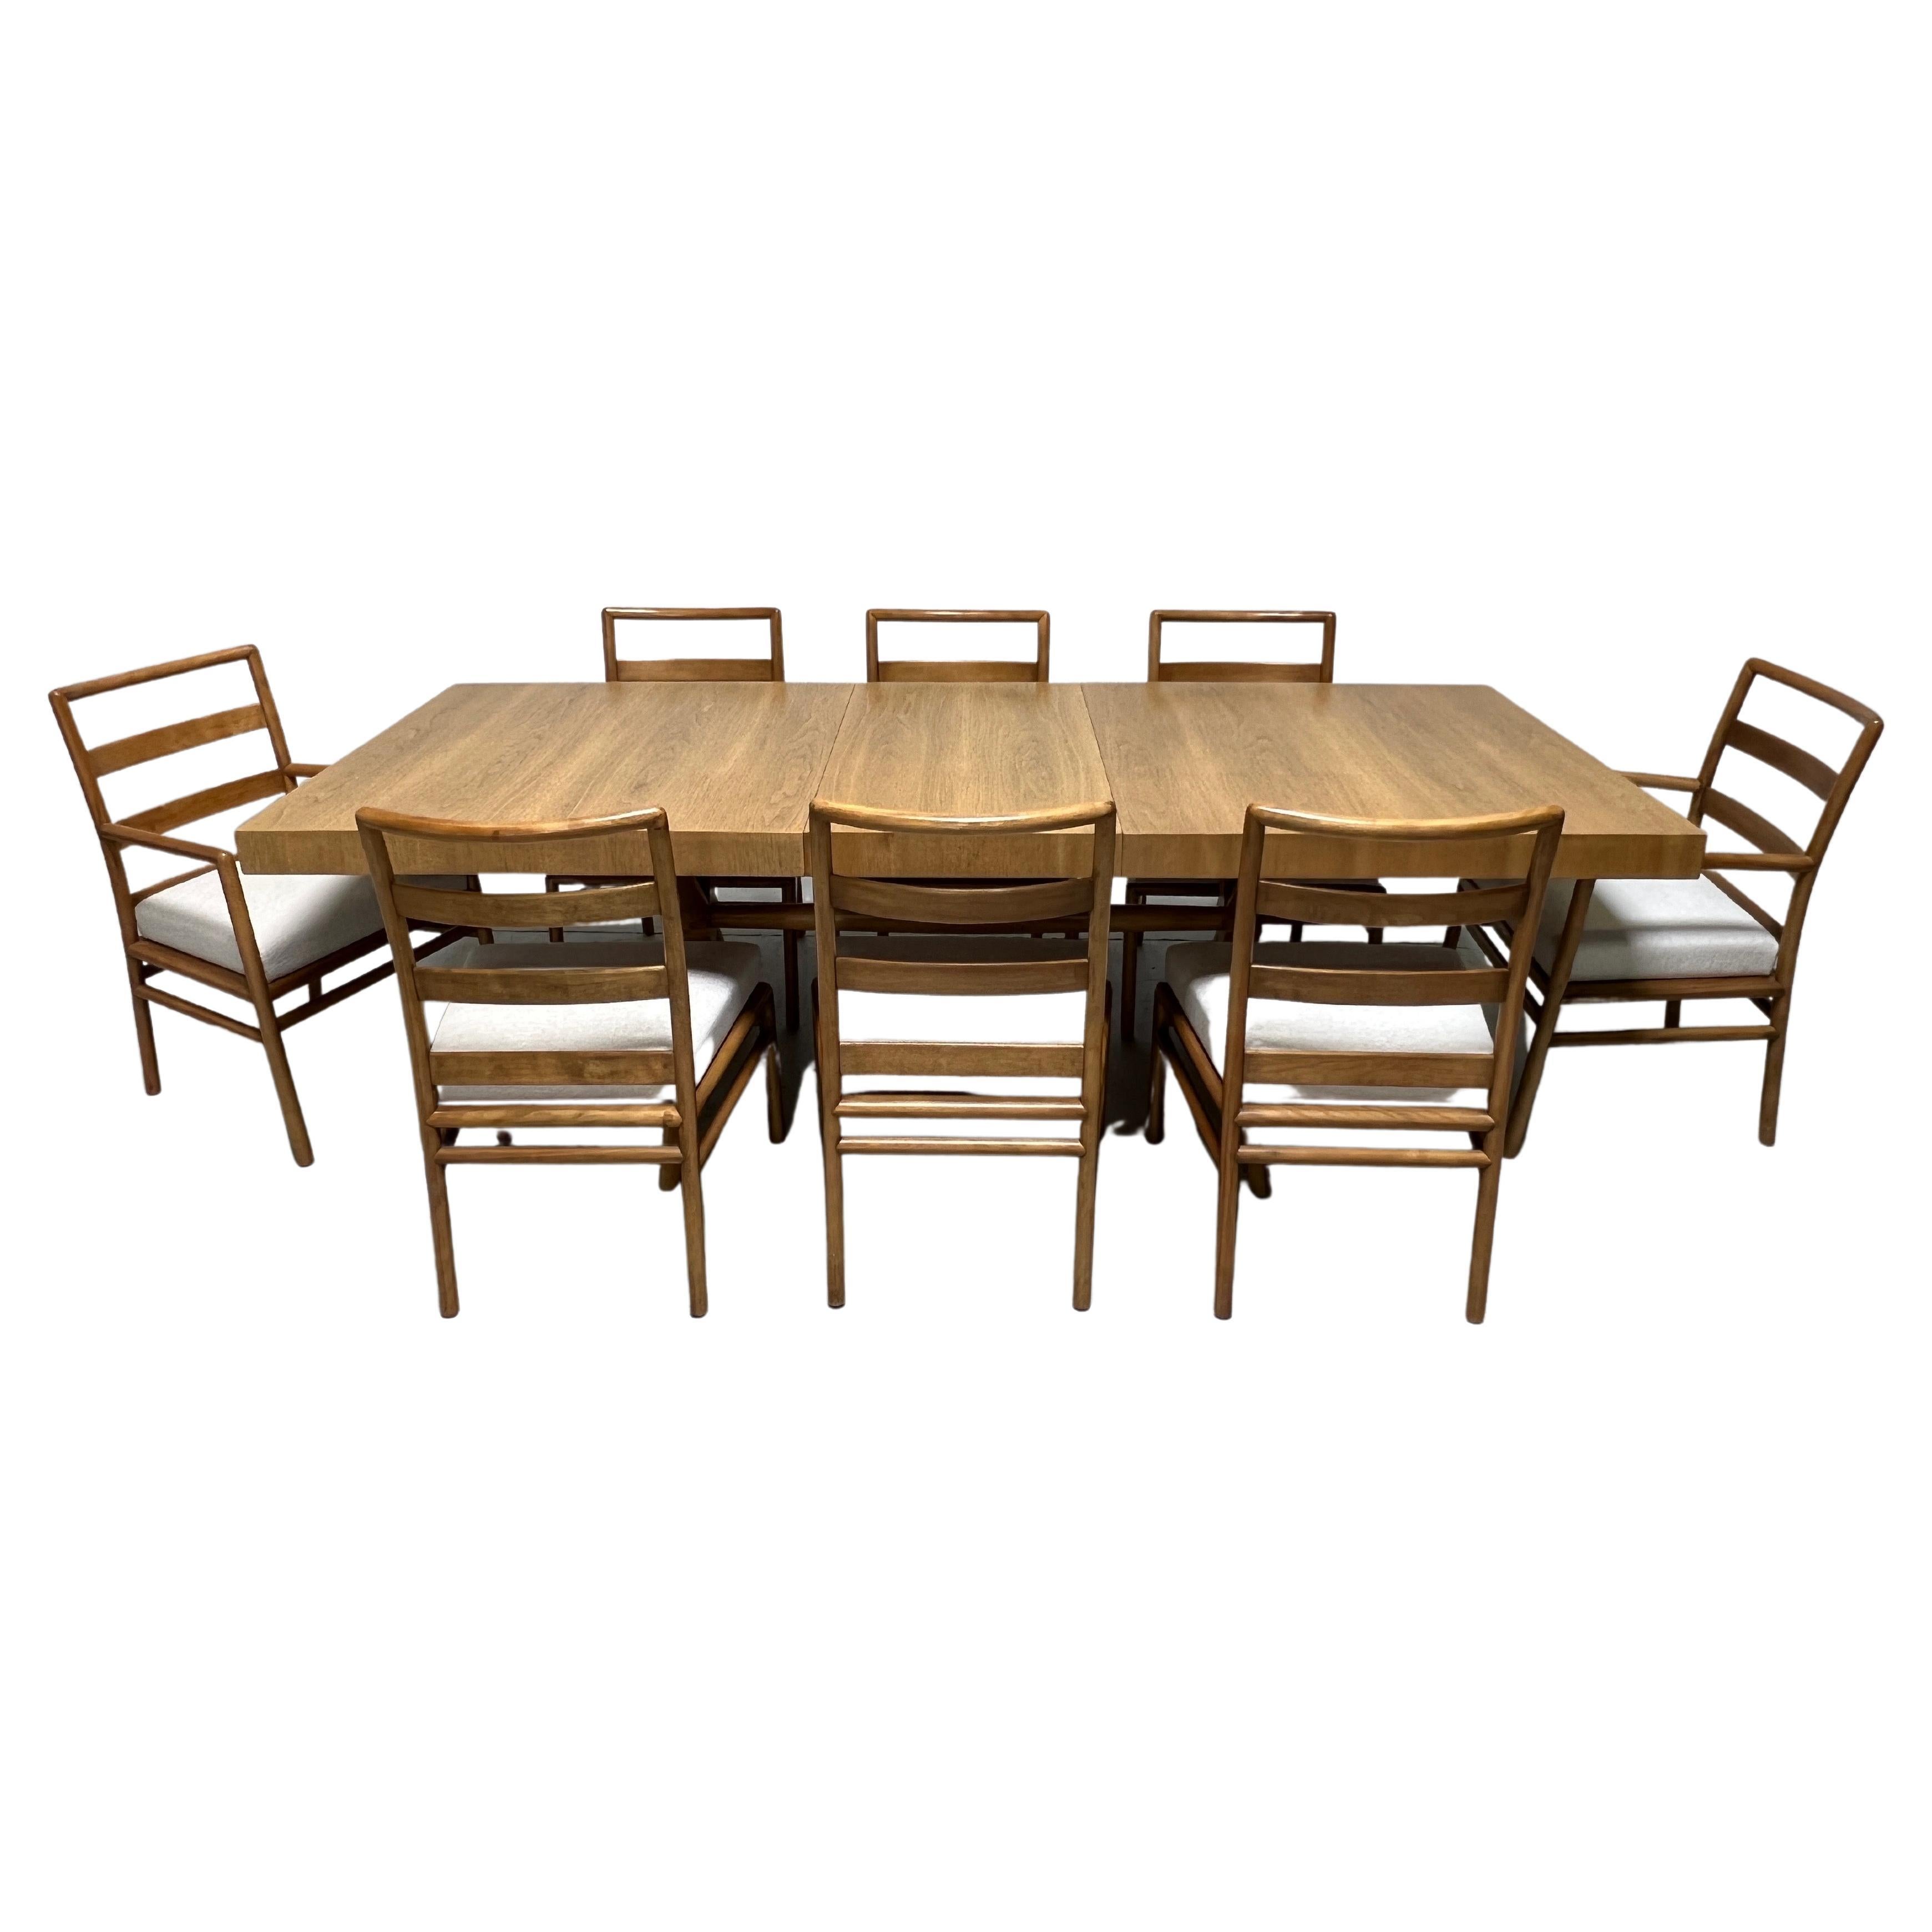 Dining Table and Eight Chairs by T.H. Robsjohn-Gibbings for Widdicomb